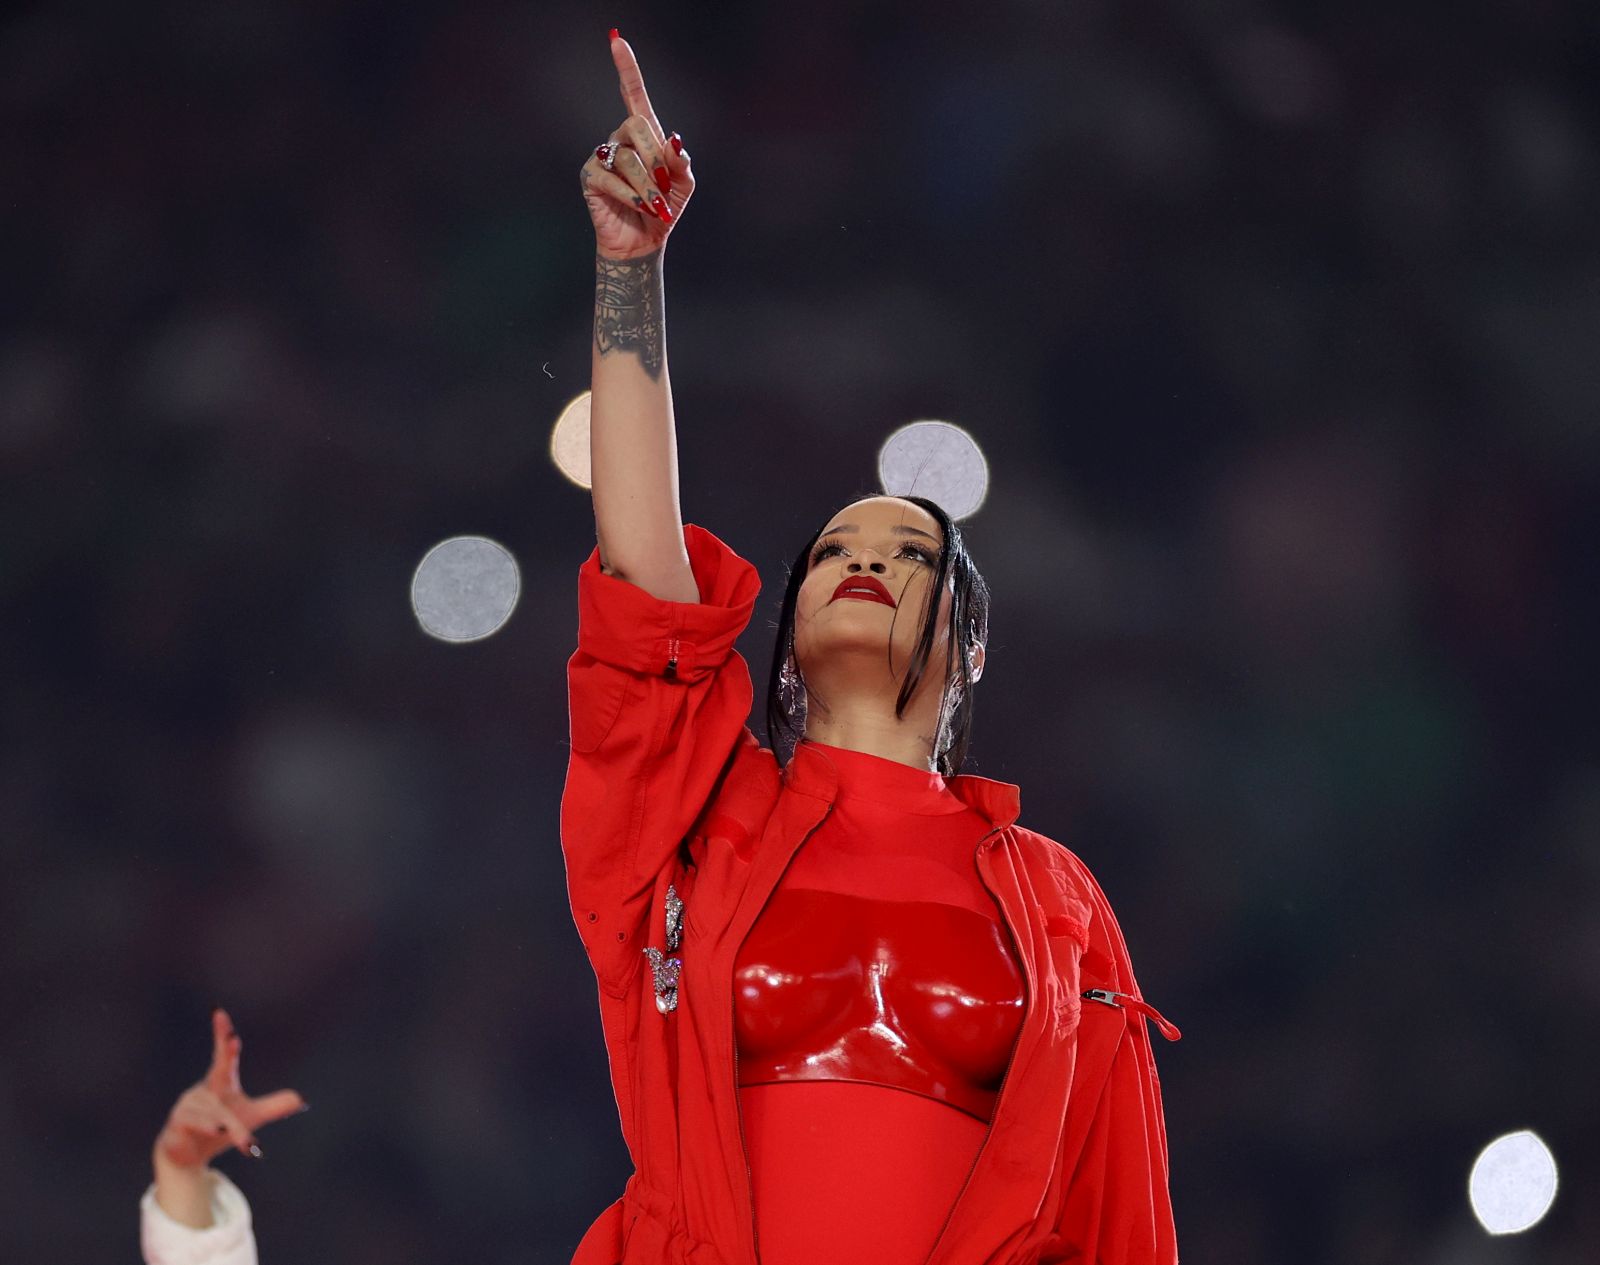 epa10464333 Barbadian singer Rihanna performs during halftime of Super Bowl LVII between the AFC champion Kansas City Chiefs and the NFC champion Philadelphia Eagles at State Farm Stadium in Glendale, Arizona, 12 February 2023. The annual Super Bowl is the Championship game of the NFL between the AFC Champion and the NFC Champion and has been held every year since January of 1967.  EPA/CAROLINE BREHMAN  EPA-EFE/CAROLINE BREHMAN